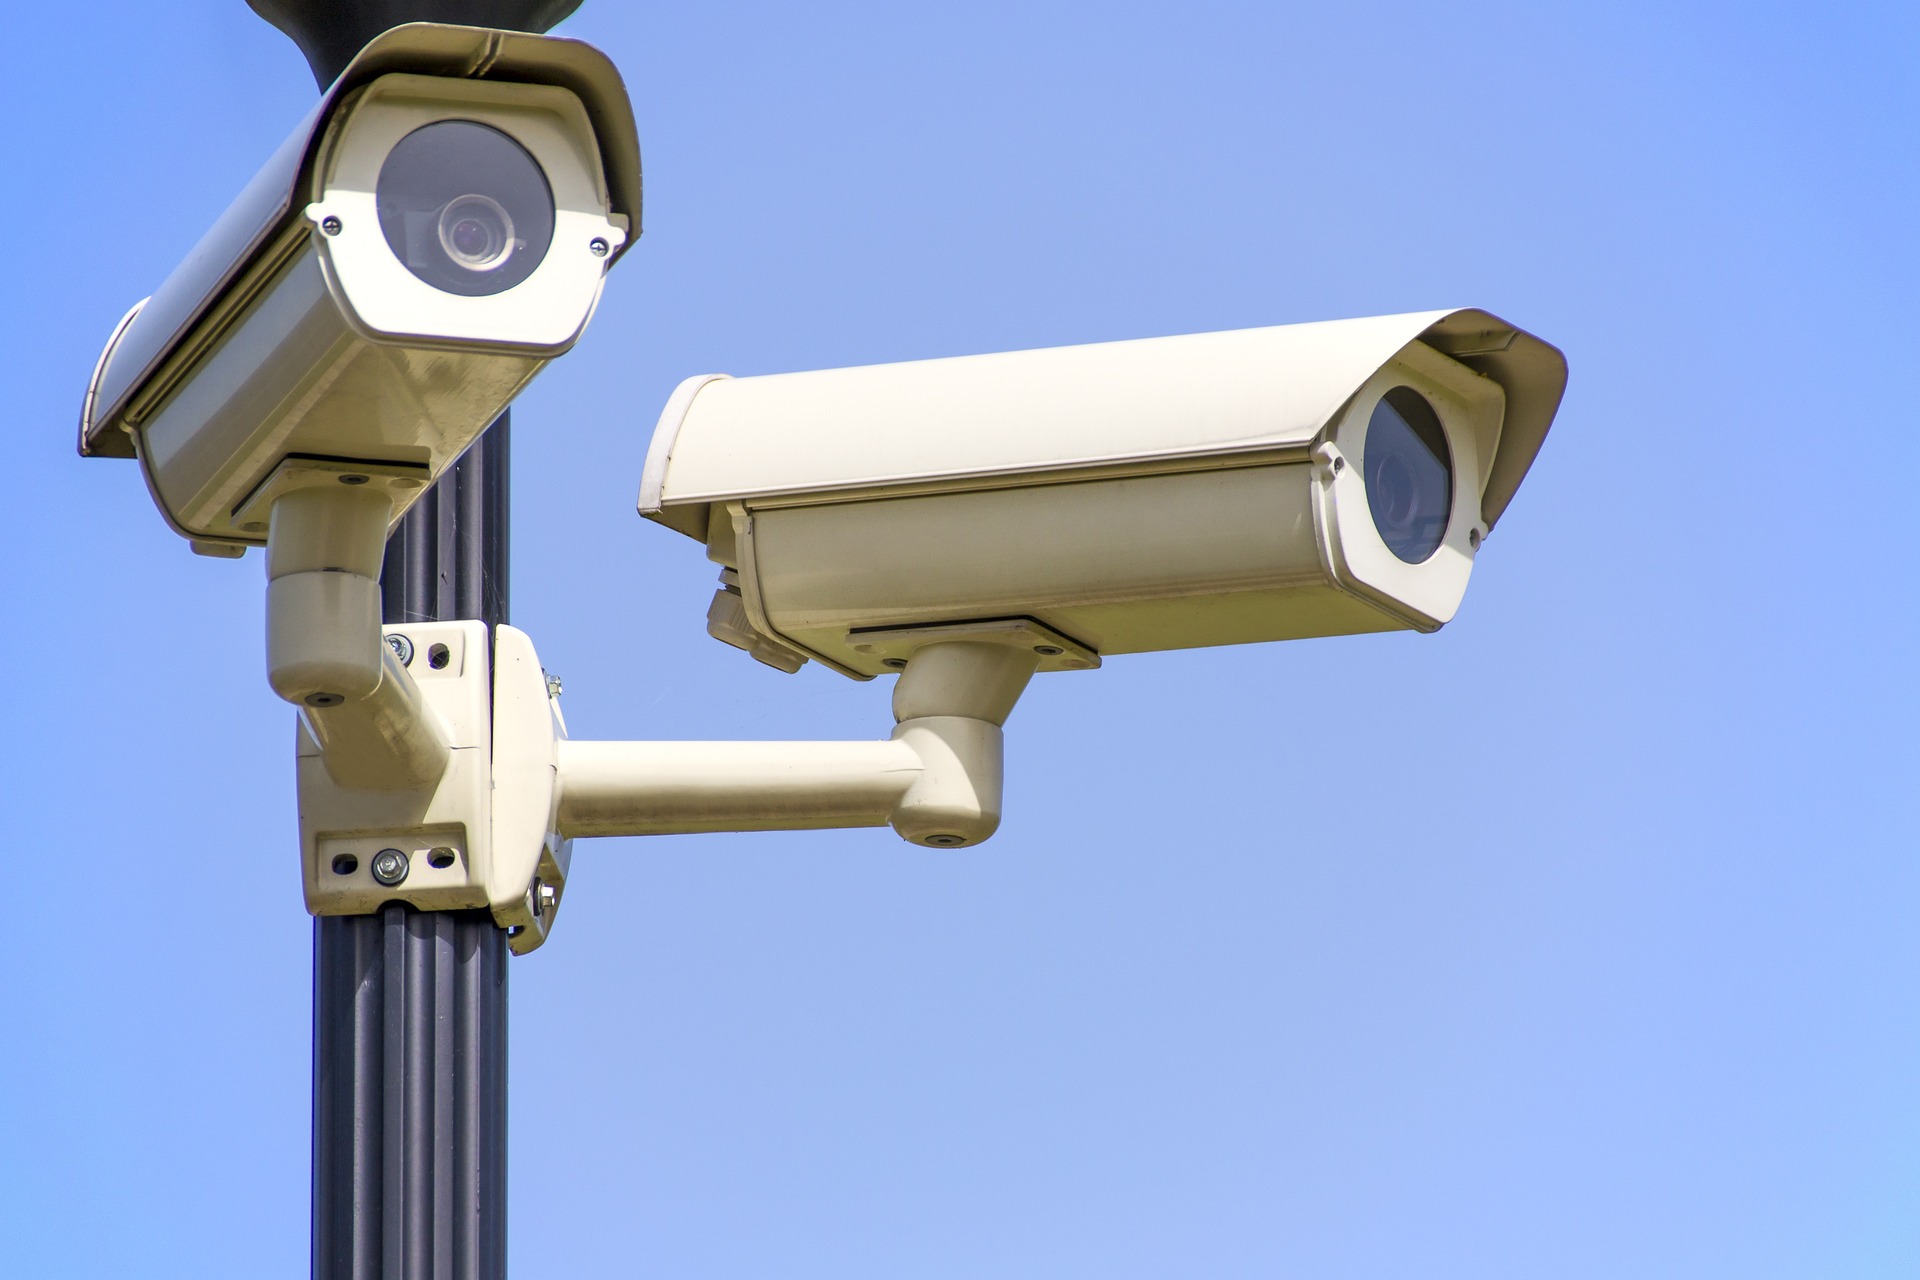 Two white security cameras pointed in different directions mounted on a black street lamp.